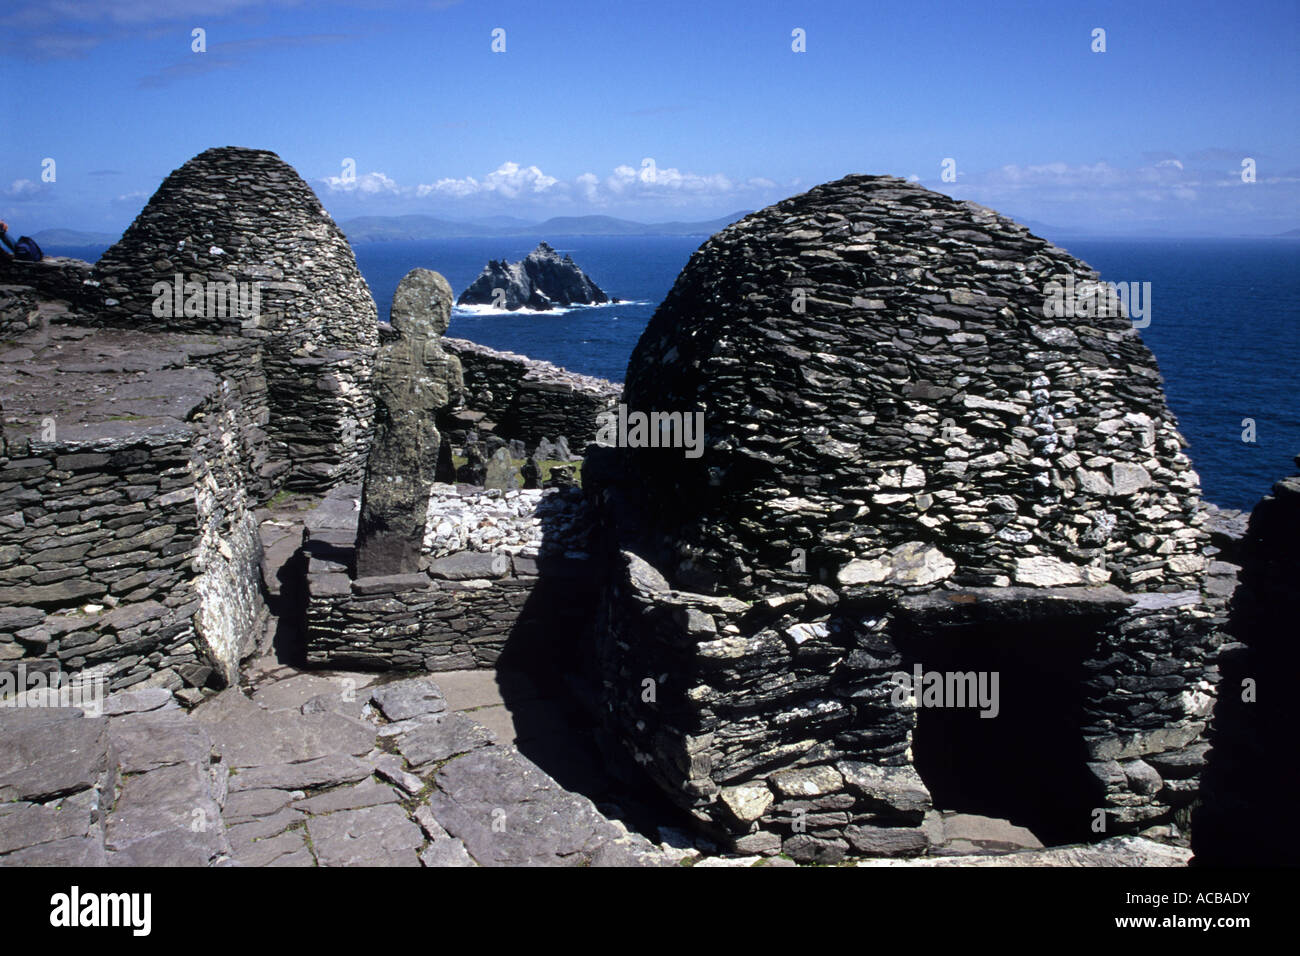 The remains of the monastic cells at Great Skellig, an island off the coast of Kerry, Republic of Ireland. Stock Photo